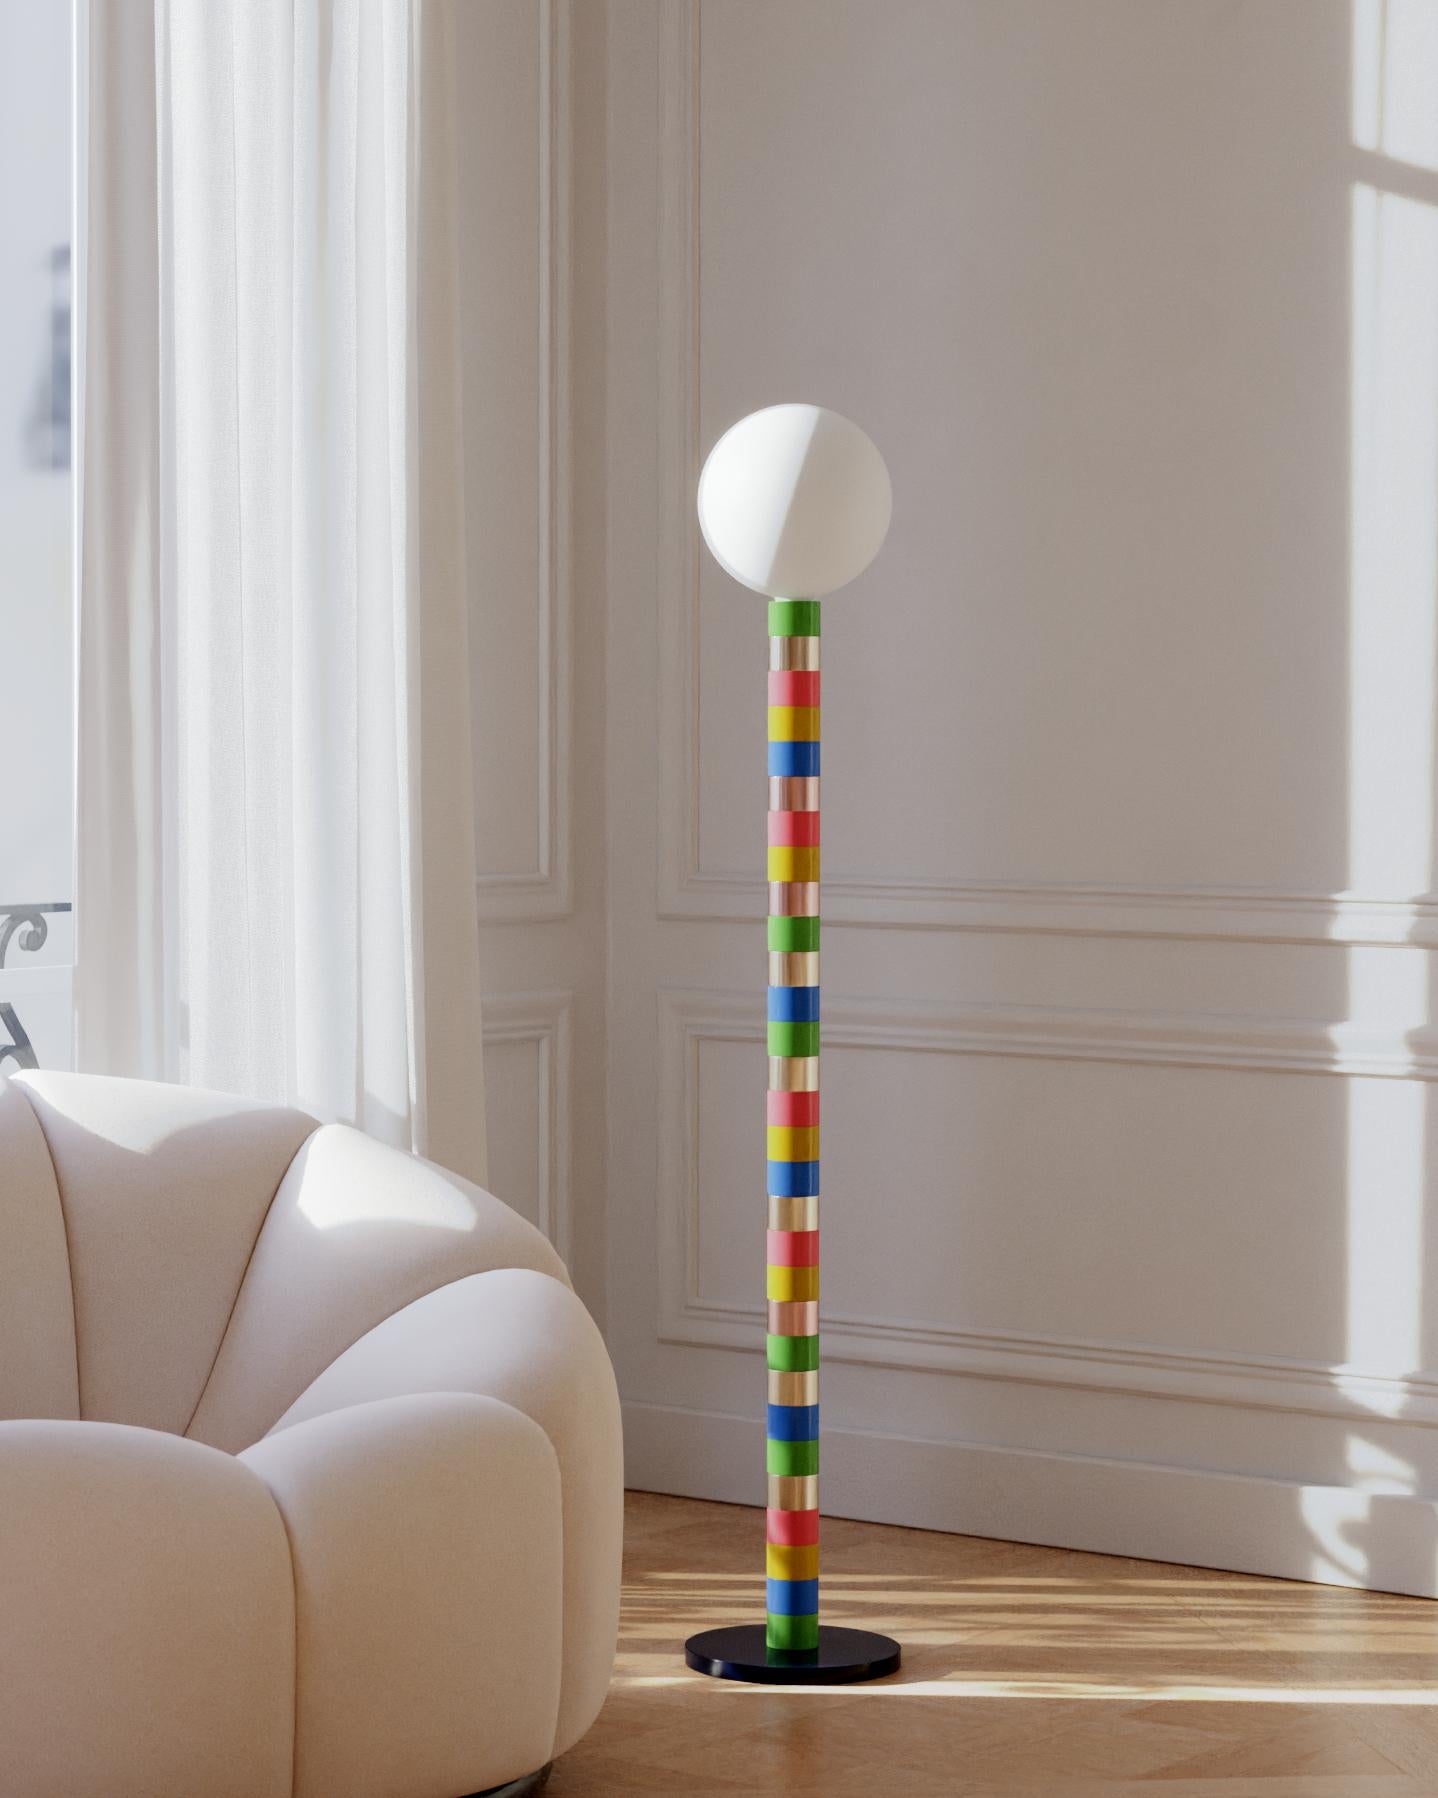 The Donna III floor lamp emits an intimate glow, casting a warm and inviting ambiance through its opaline bulb, wherever it stands. Versatile in its application, it gracefully adorns living rooms, bedrooms, or even next to a bookshelf, adding a